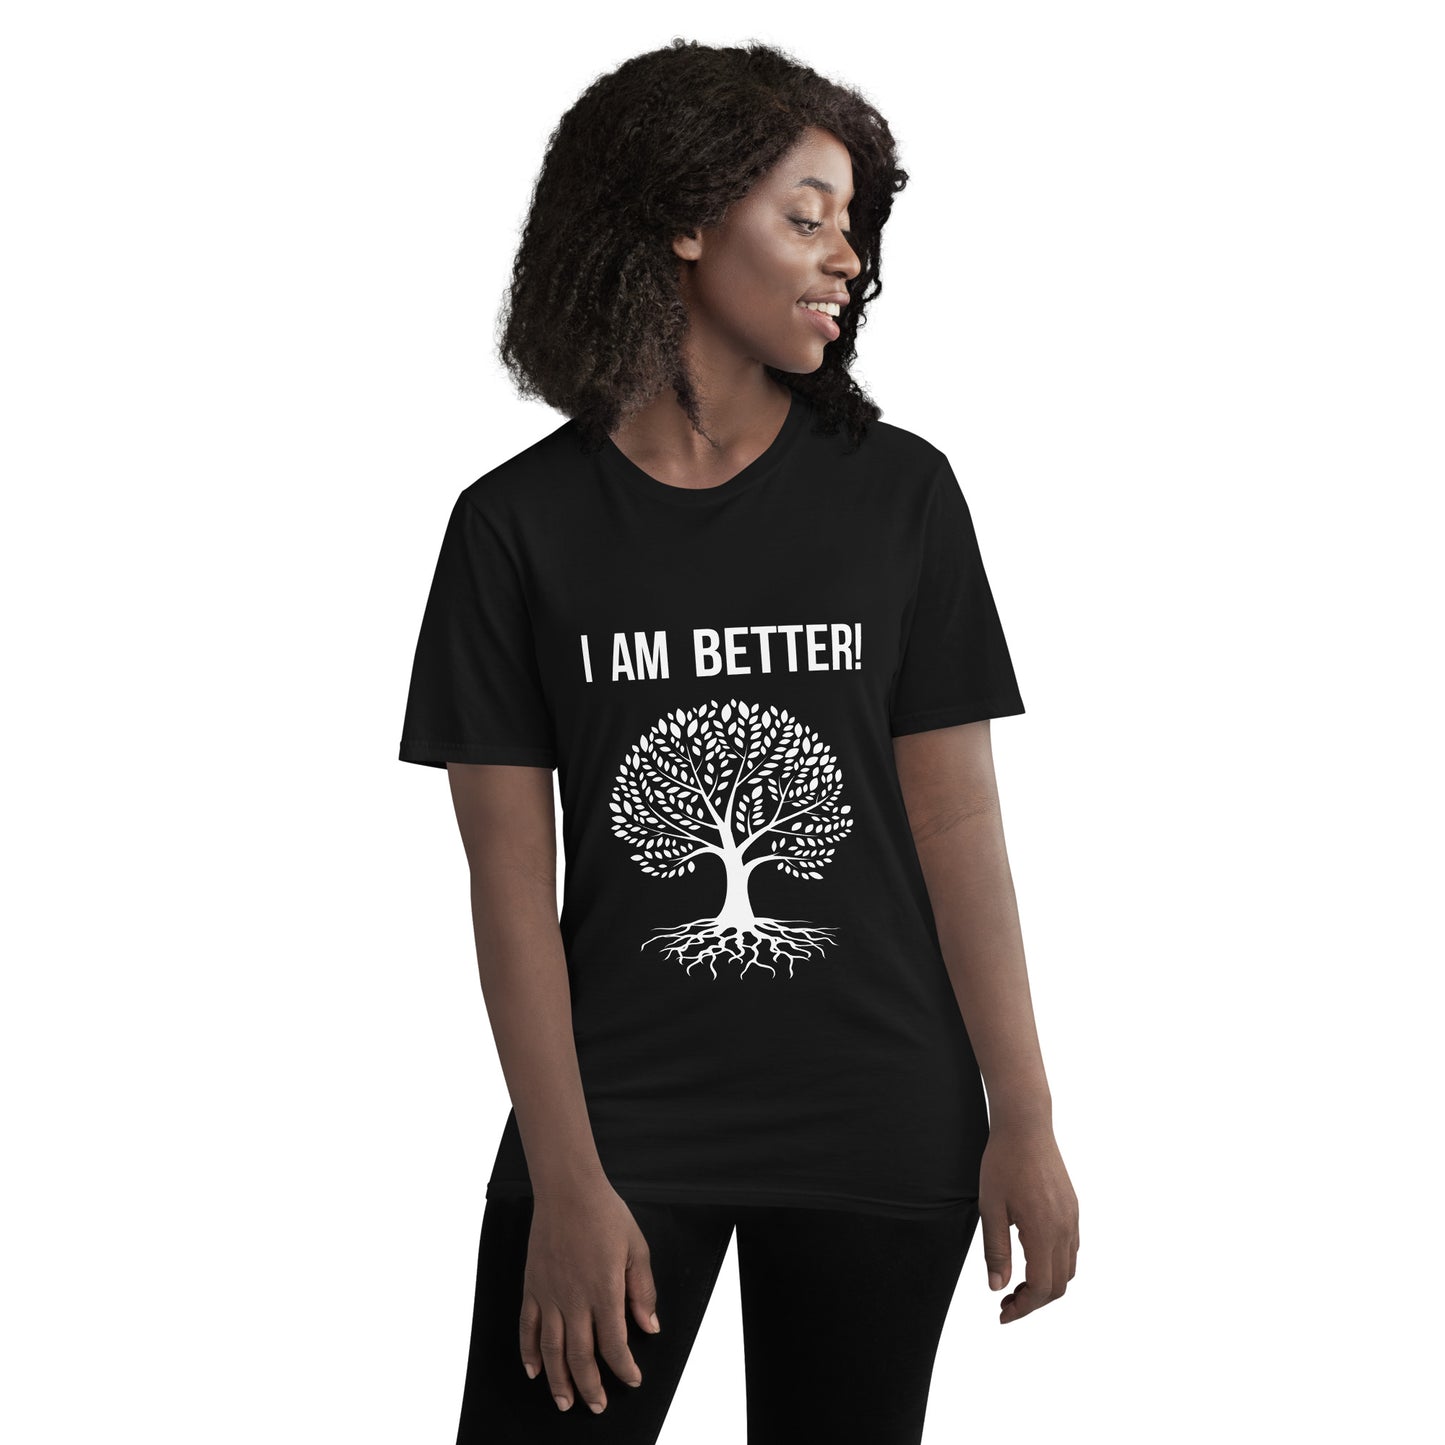 "I AM Better" Tree and Roots Design T-Shirt